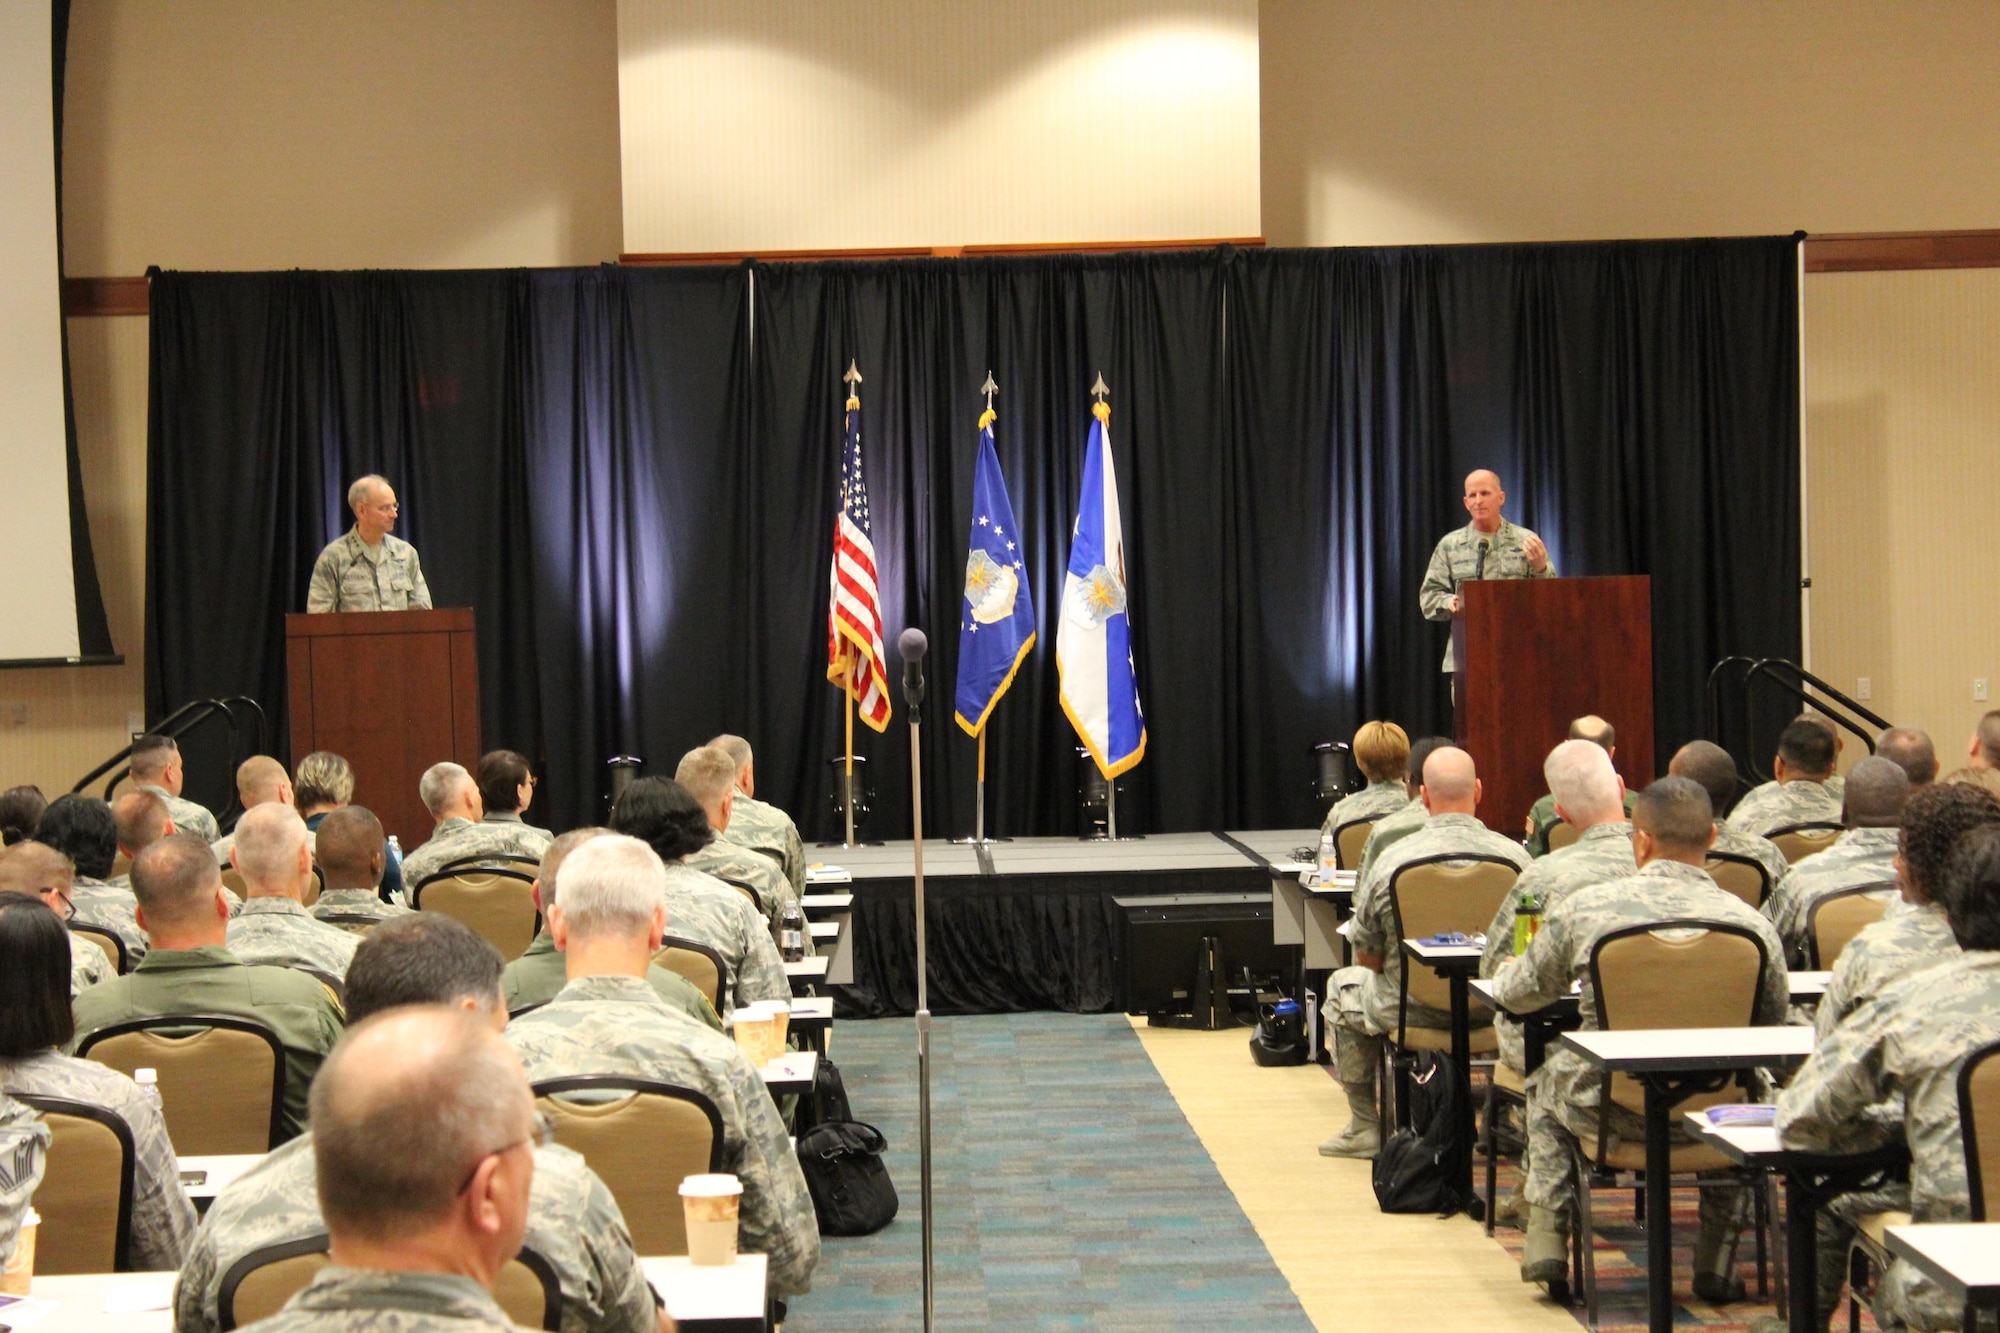 Close to 400 officers and noncommissioned officers will gather to discuss ideas and share observations related to the theme of “Air Force Medicine in Action – Powering Health and Performance.” The workshop covers four days of sessions including interactive activities, a look at medical innovation, and speeches from some of the top members of the AFMS and the Air Force.